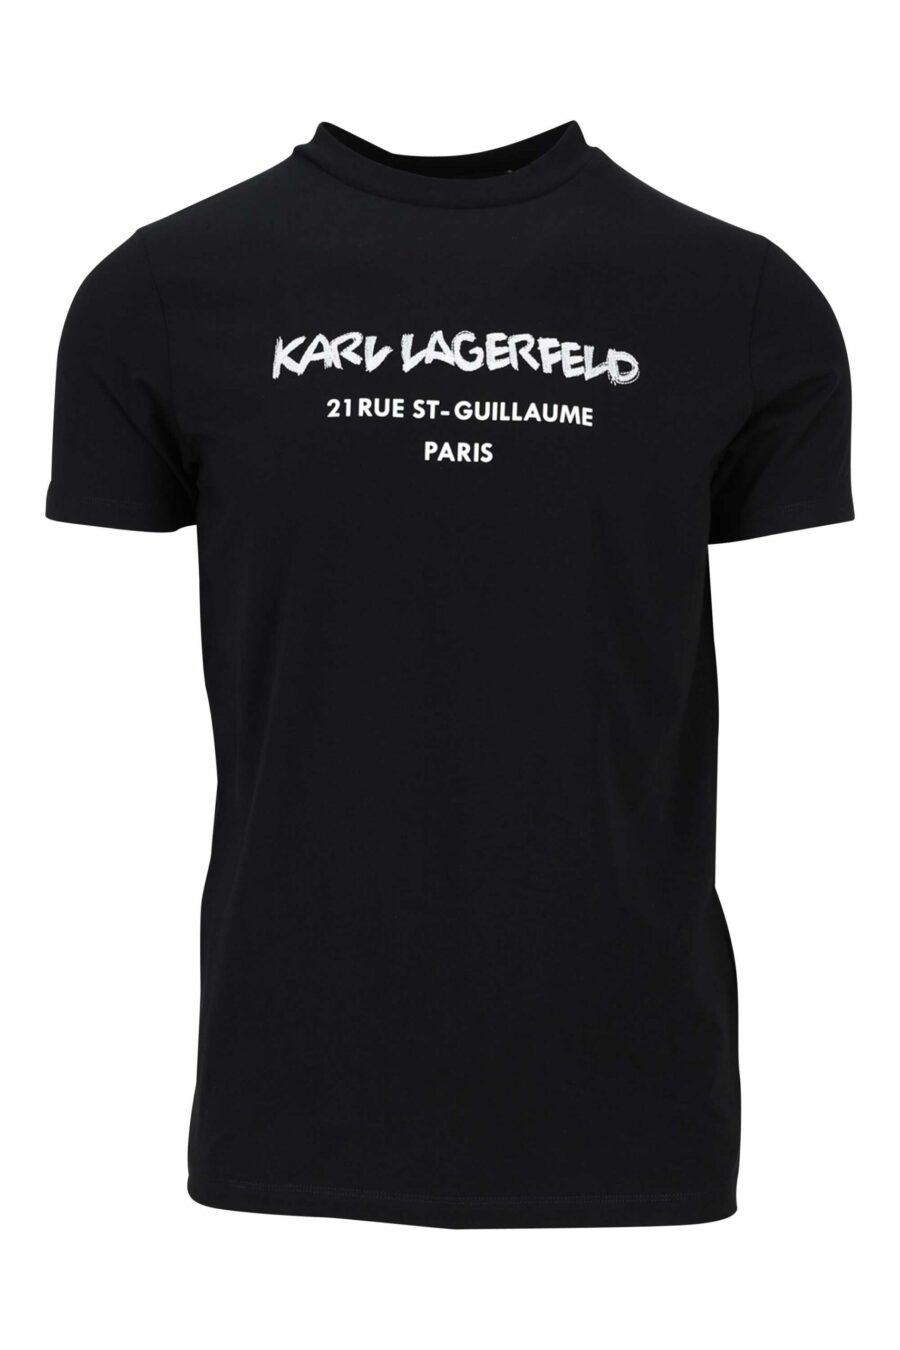 Black T-shirt with white centred logo - 4062226676205 1 scaled